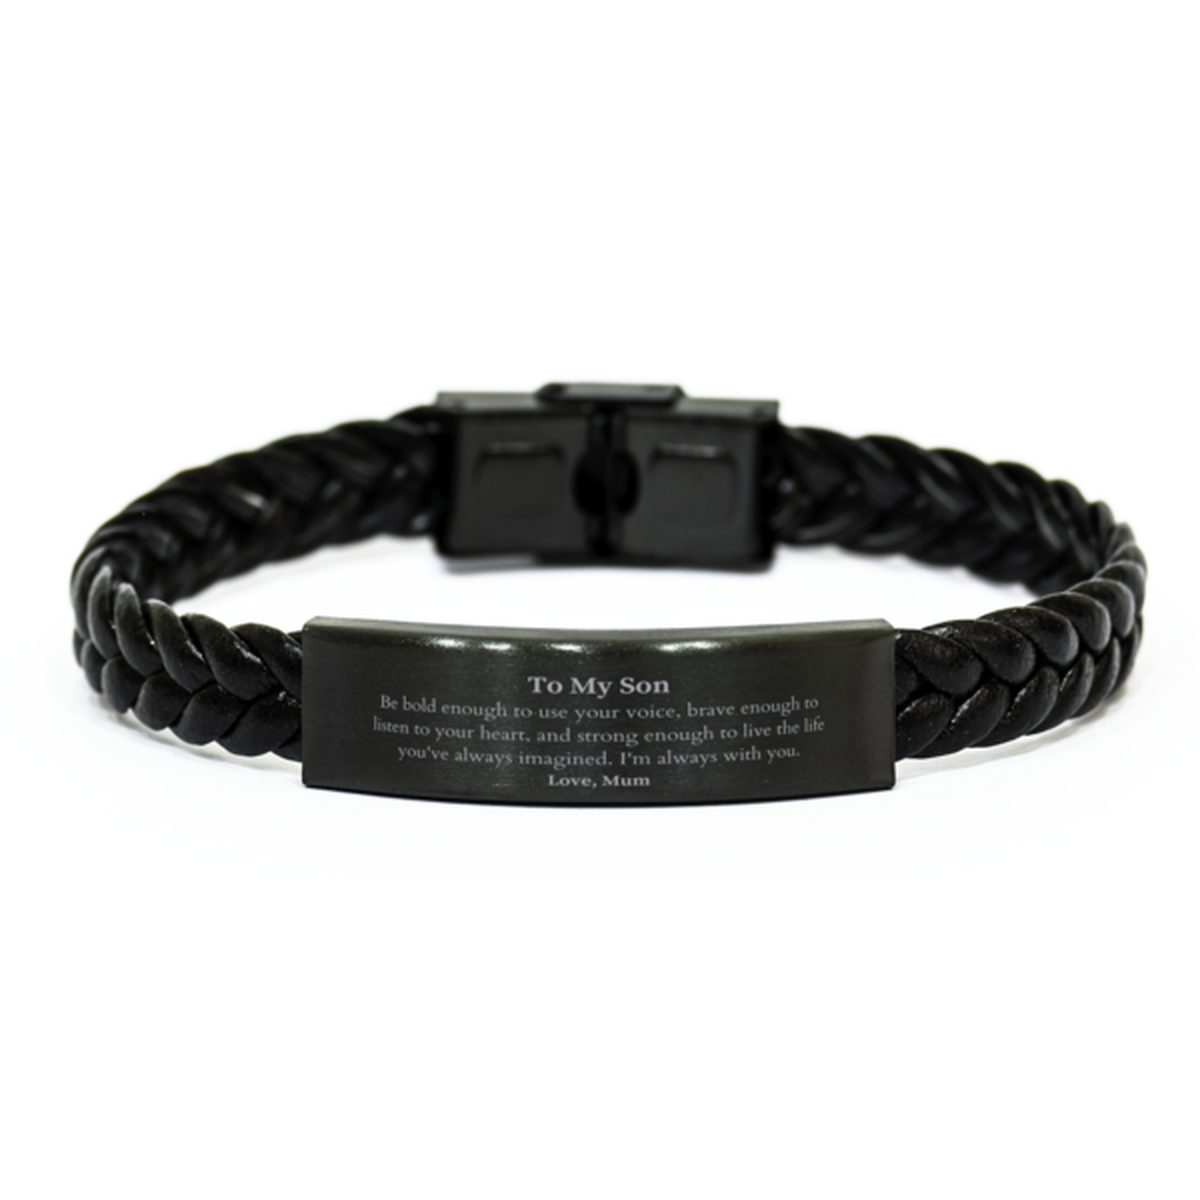 Keepsake Son Braided Leather Bracelet Gift Idea Graduation Christmas Birthday Son from Mum, Son Be bold enough to use your voice, brave enough to listen to your heart. Love, Mum